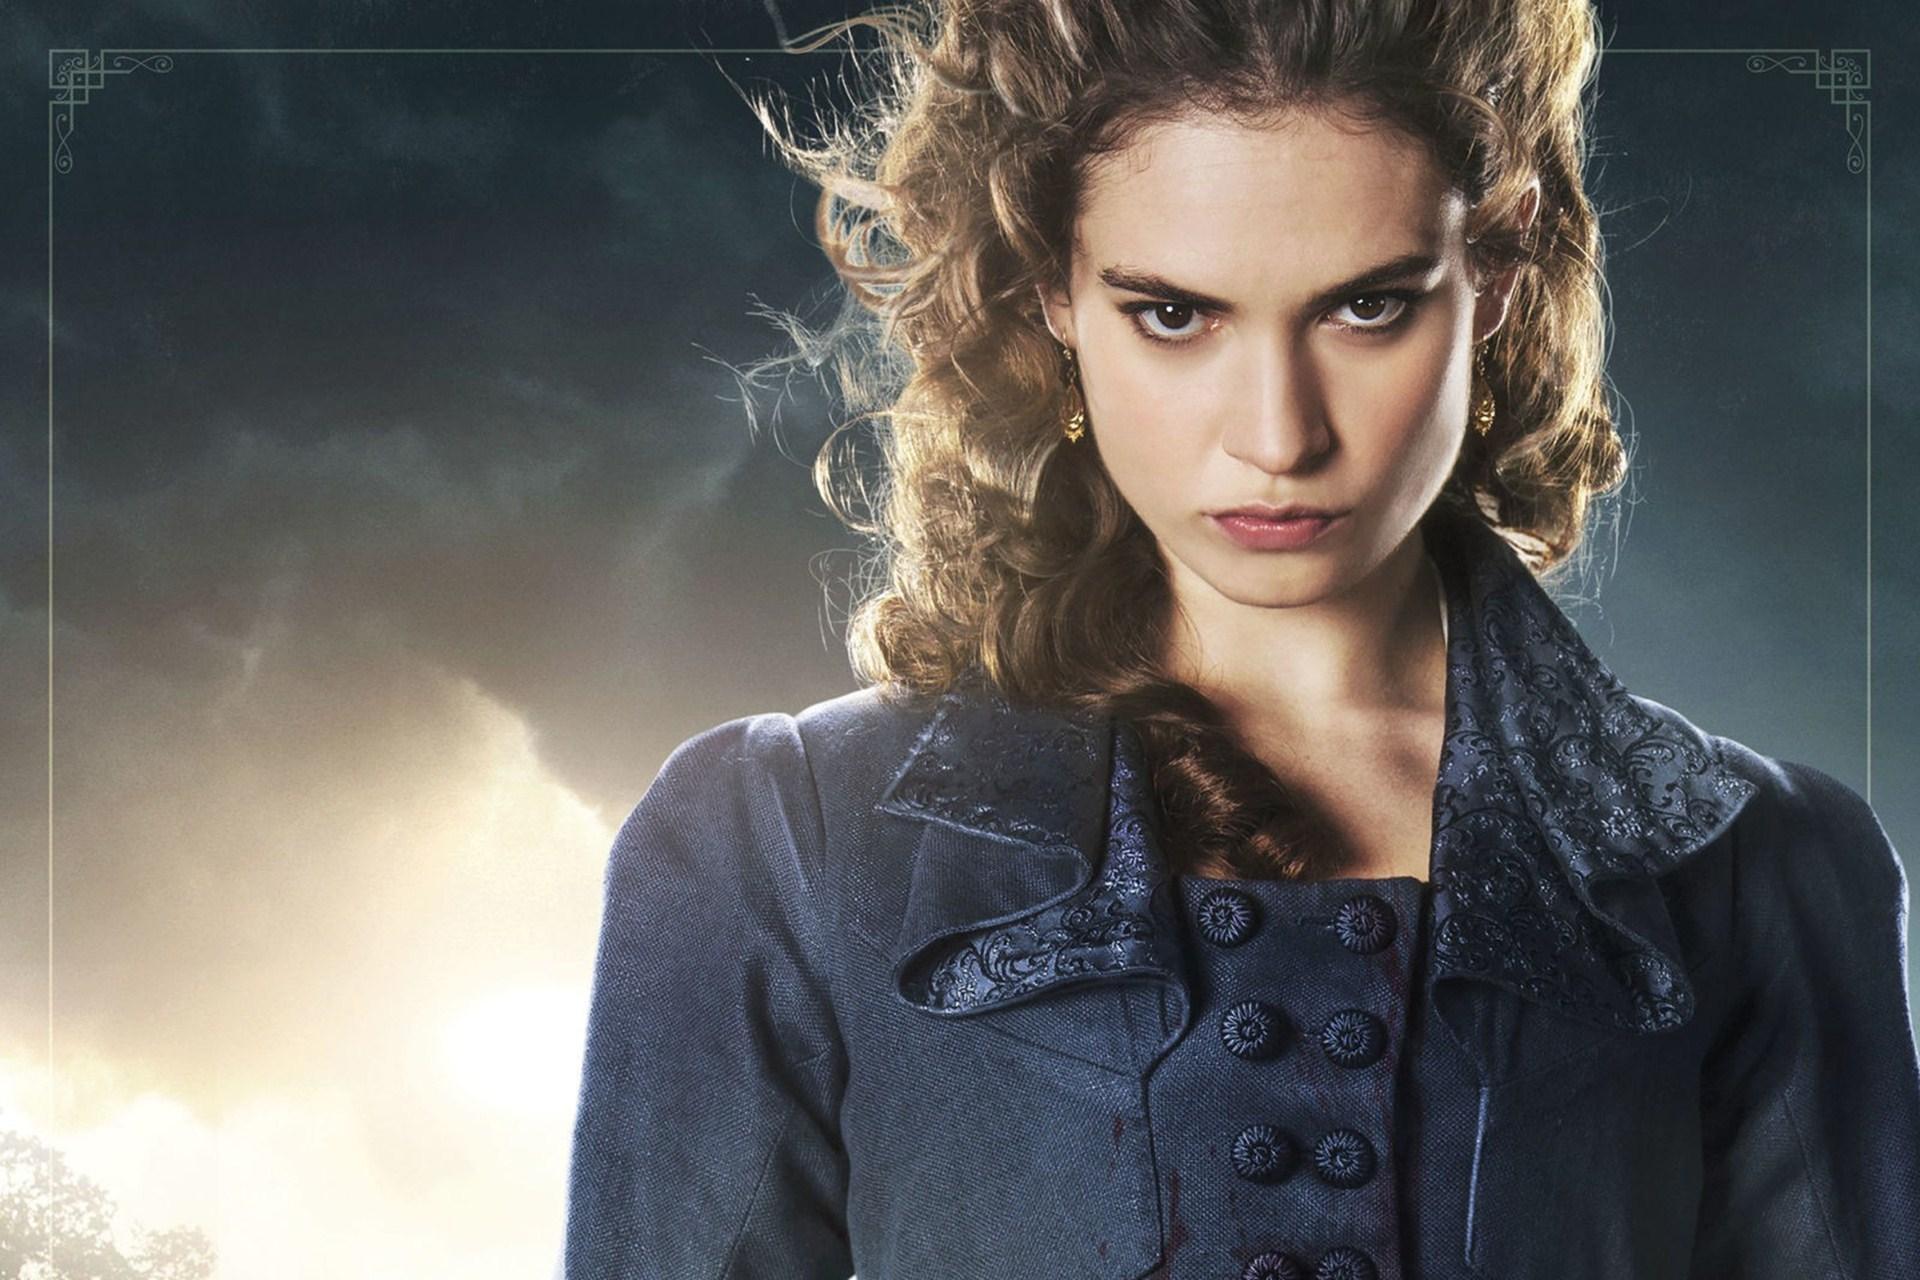 Actress Lily James In Pride And Prejudice And Zombies Movie